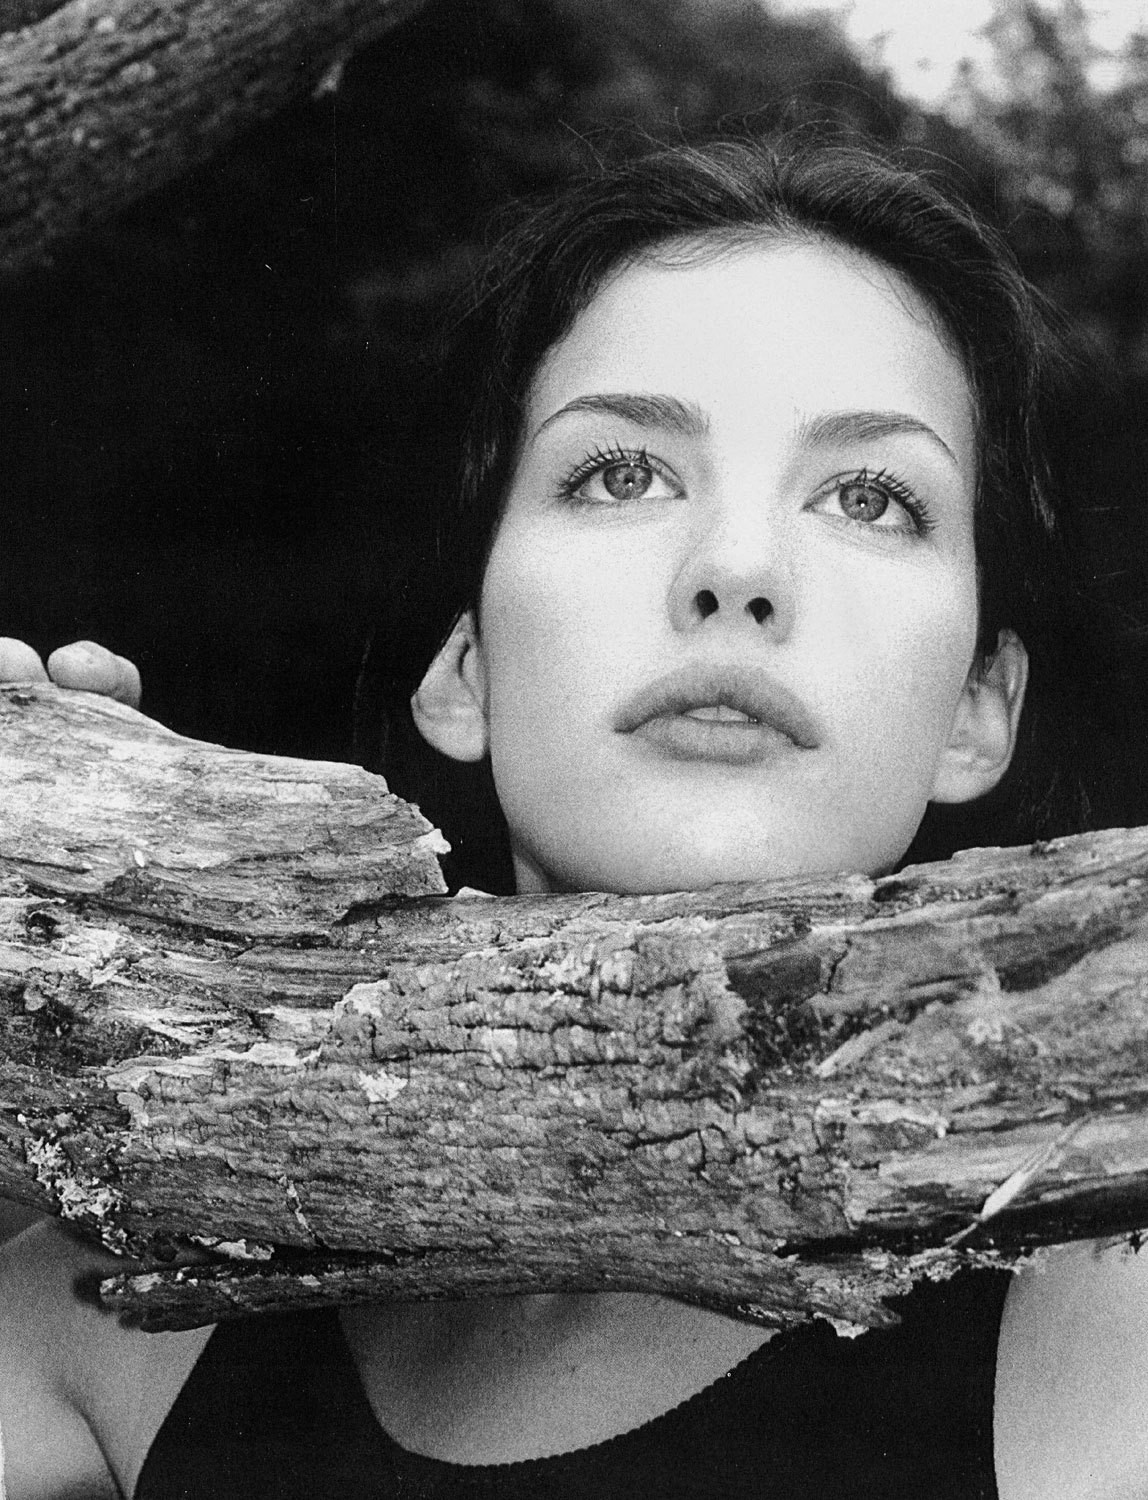 Liv Tyler photo 158 of 974 pics, wallpaper - photo #76710 - ThePlace2